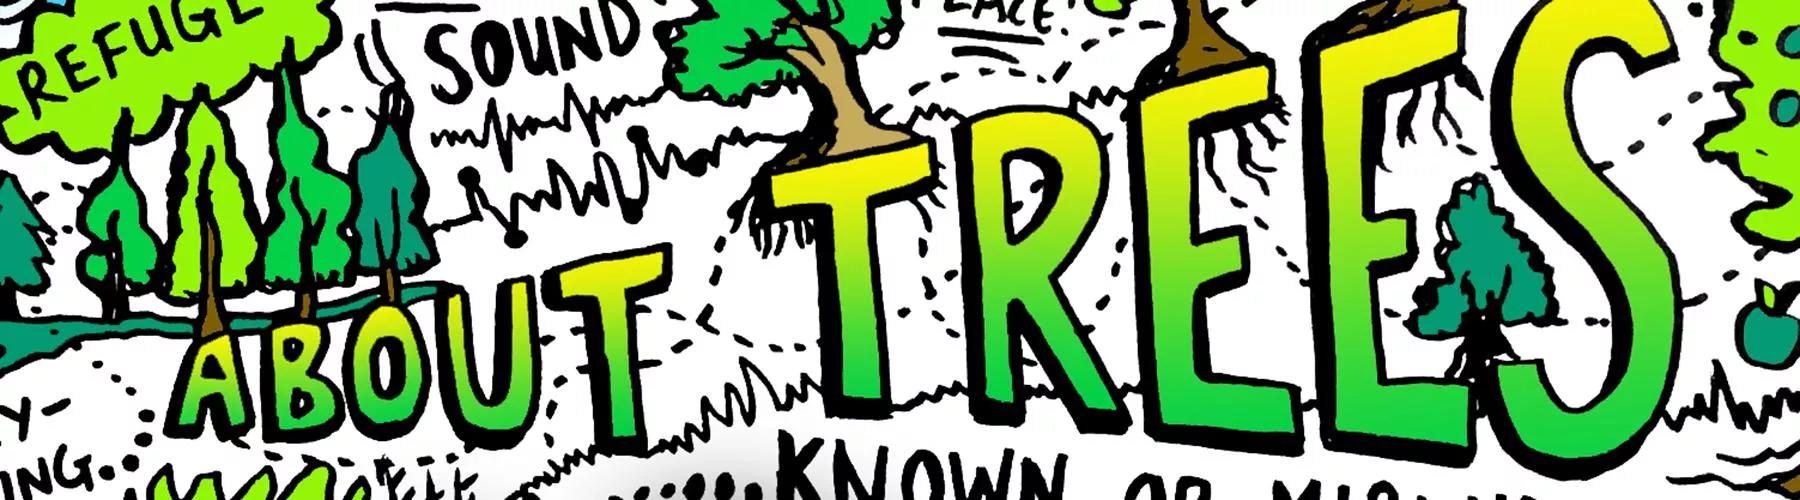 About Trees live sketch note